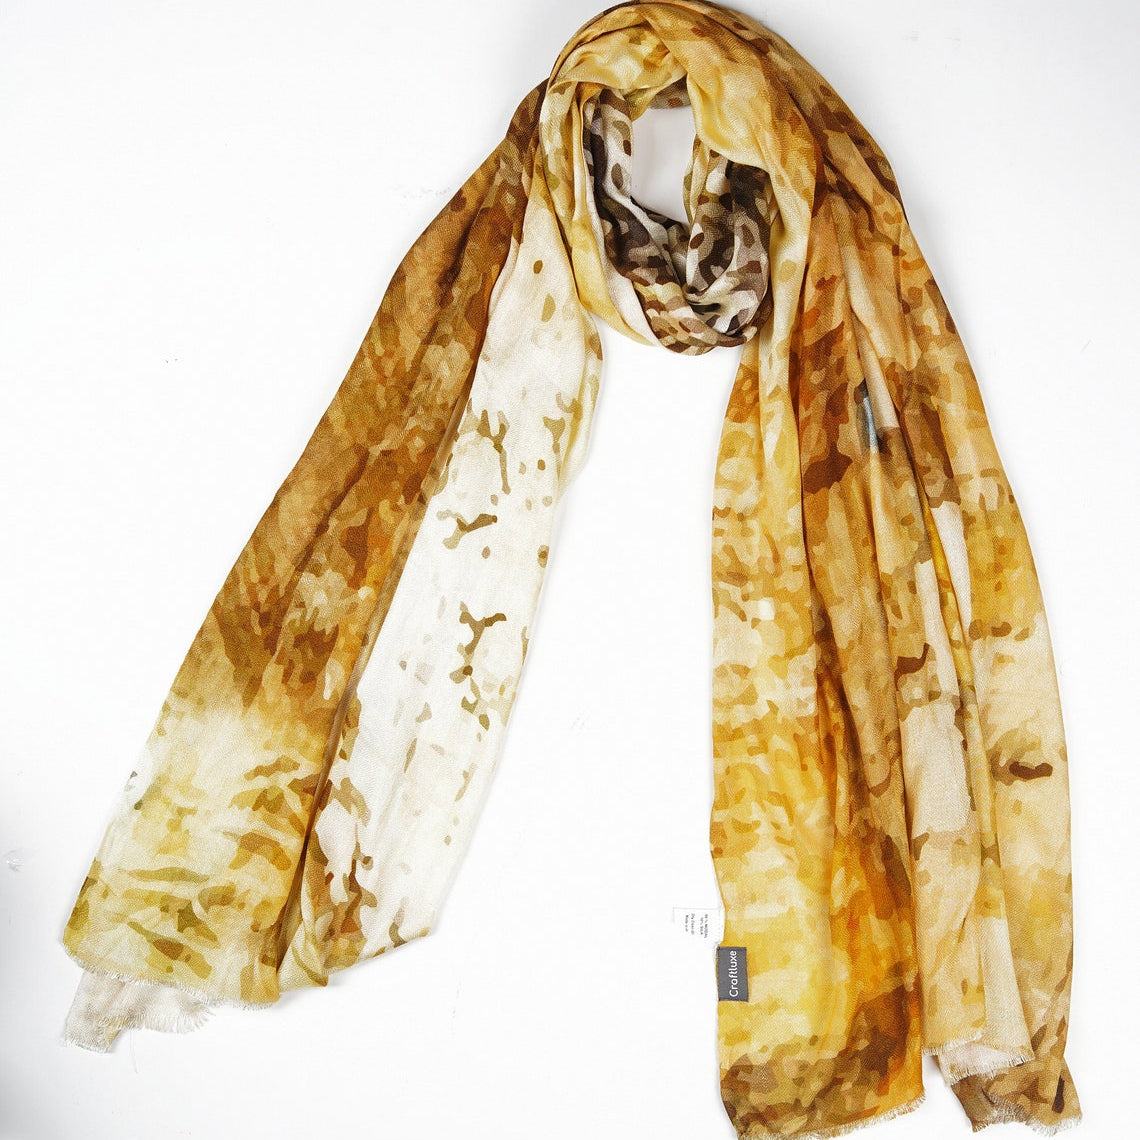 Silk Modal Scarf, long all season scarf in luxurious fabric blend, shawl and wrap, accessories for women, gifts for her, summer scarf, shawl - Mustard/Cream